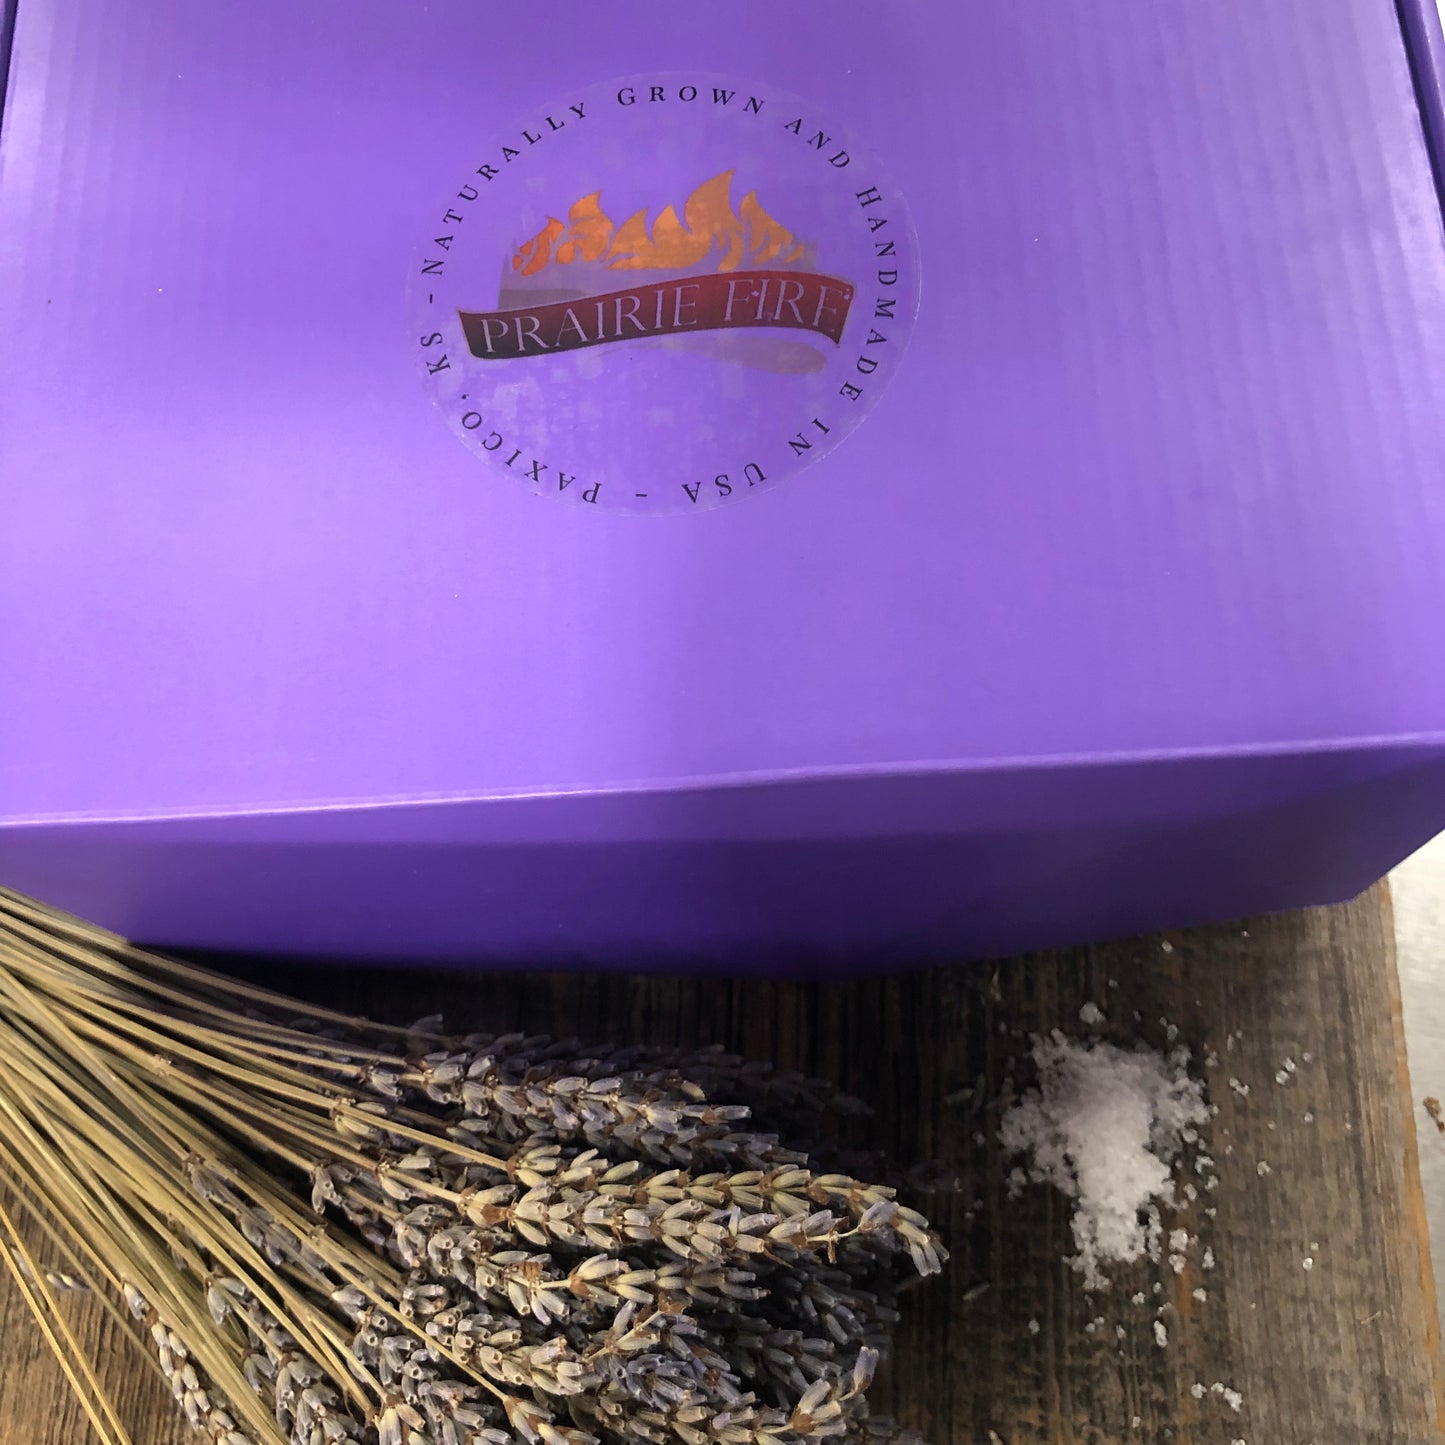 Lavender Lovers Candle Relaxation Luxury Gift Set Box - Kansas Gift Basket - Prairie Fire Candles